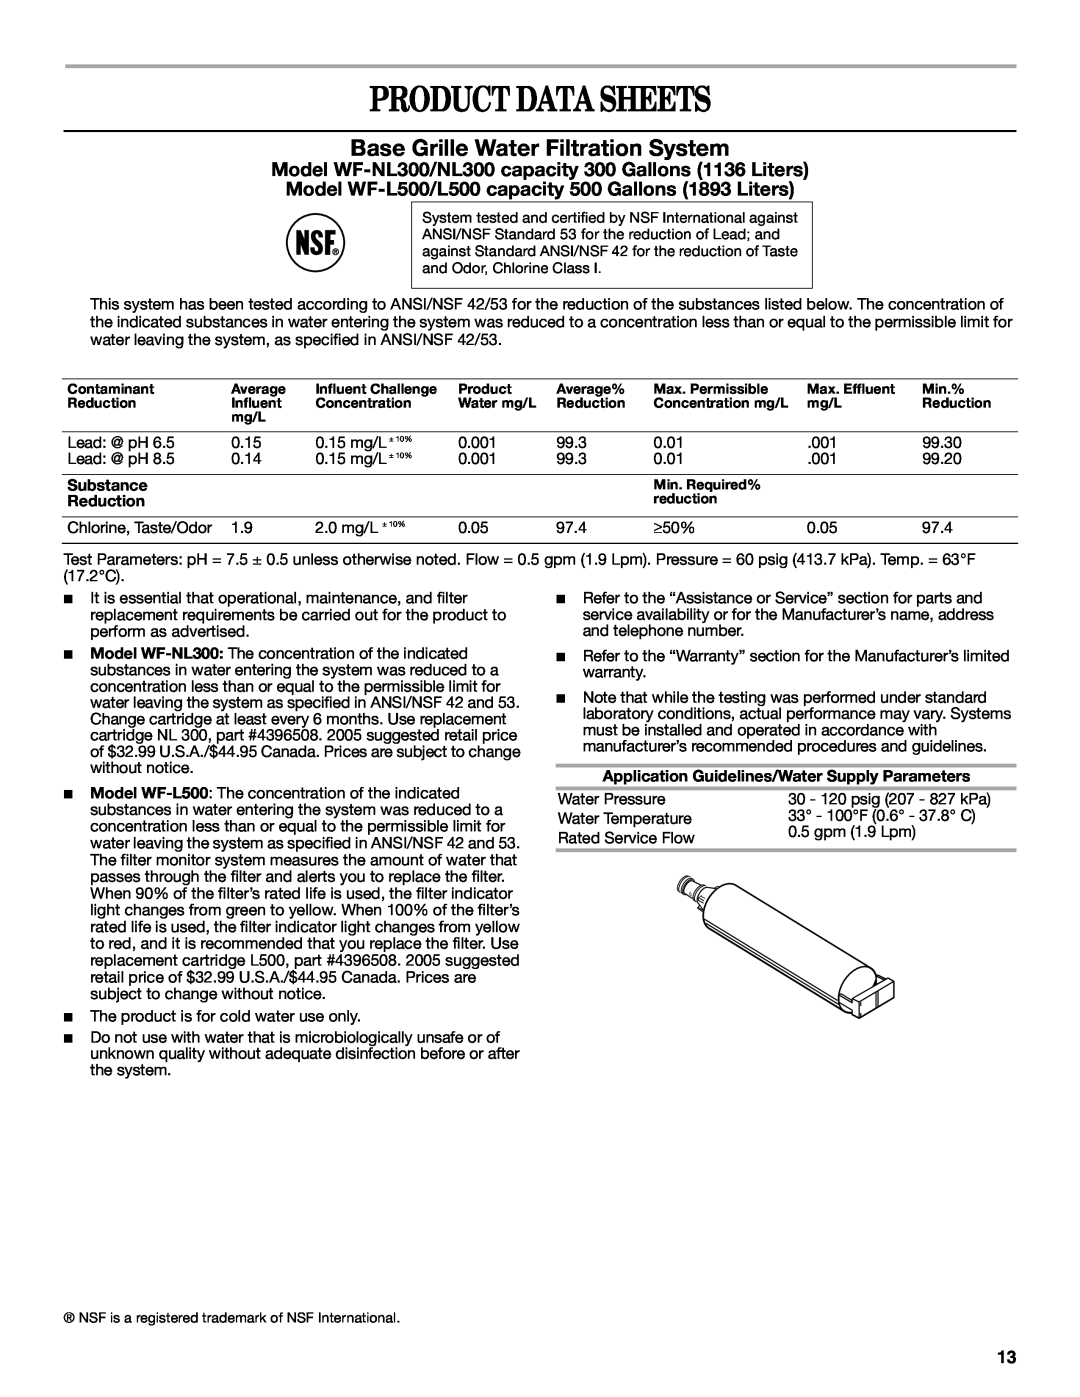 Whirlpool GC1SHAXMB00 warranty Product Data Sheets, Base Grille Water Filtration System, Substance, Reduction 